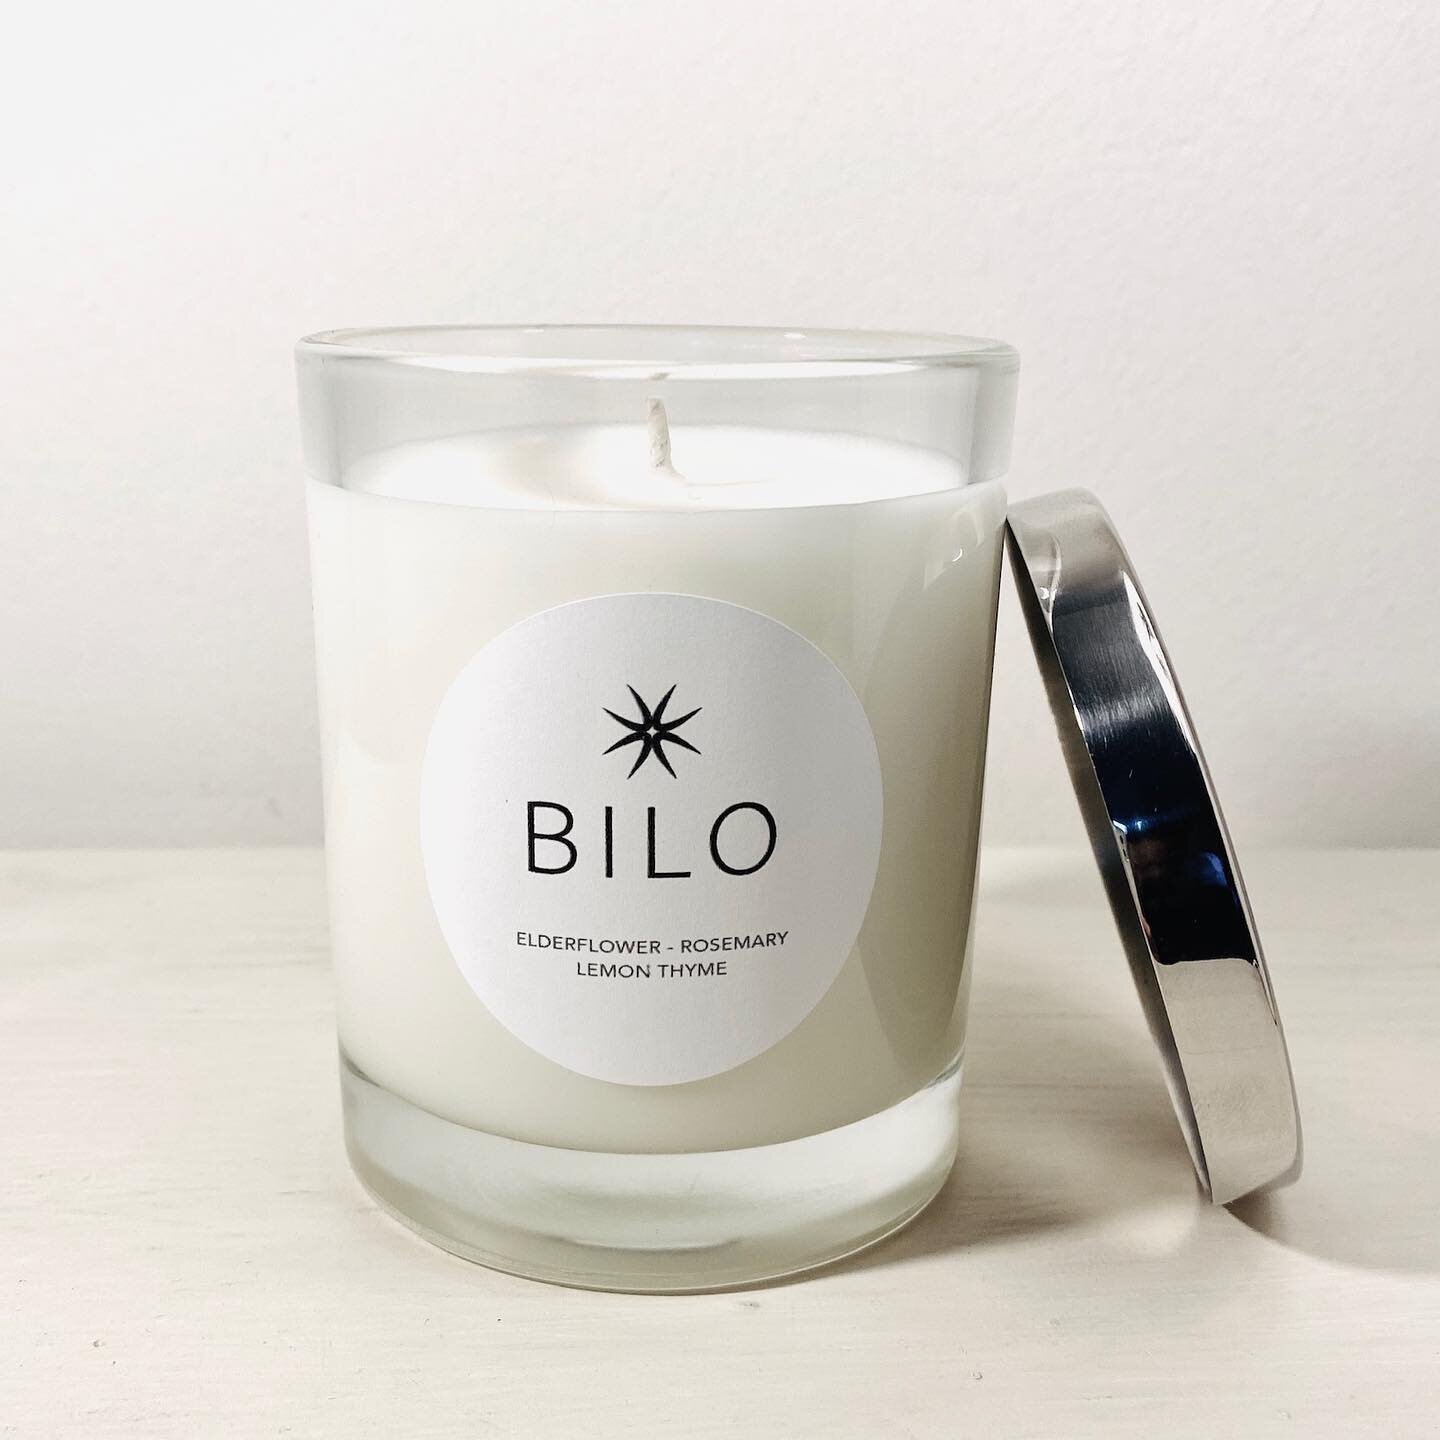 Bilo&rsquo;s 200g luxury candle has a 40 hour burn time and comes with a steel lid for snuffing out your candle safely. 

Made with sustainable rapeseed and coconut wax and packaged in a recyclable card container with no plastic, this makes a lovely 